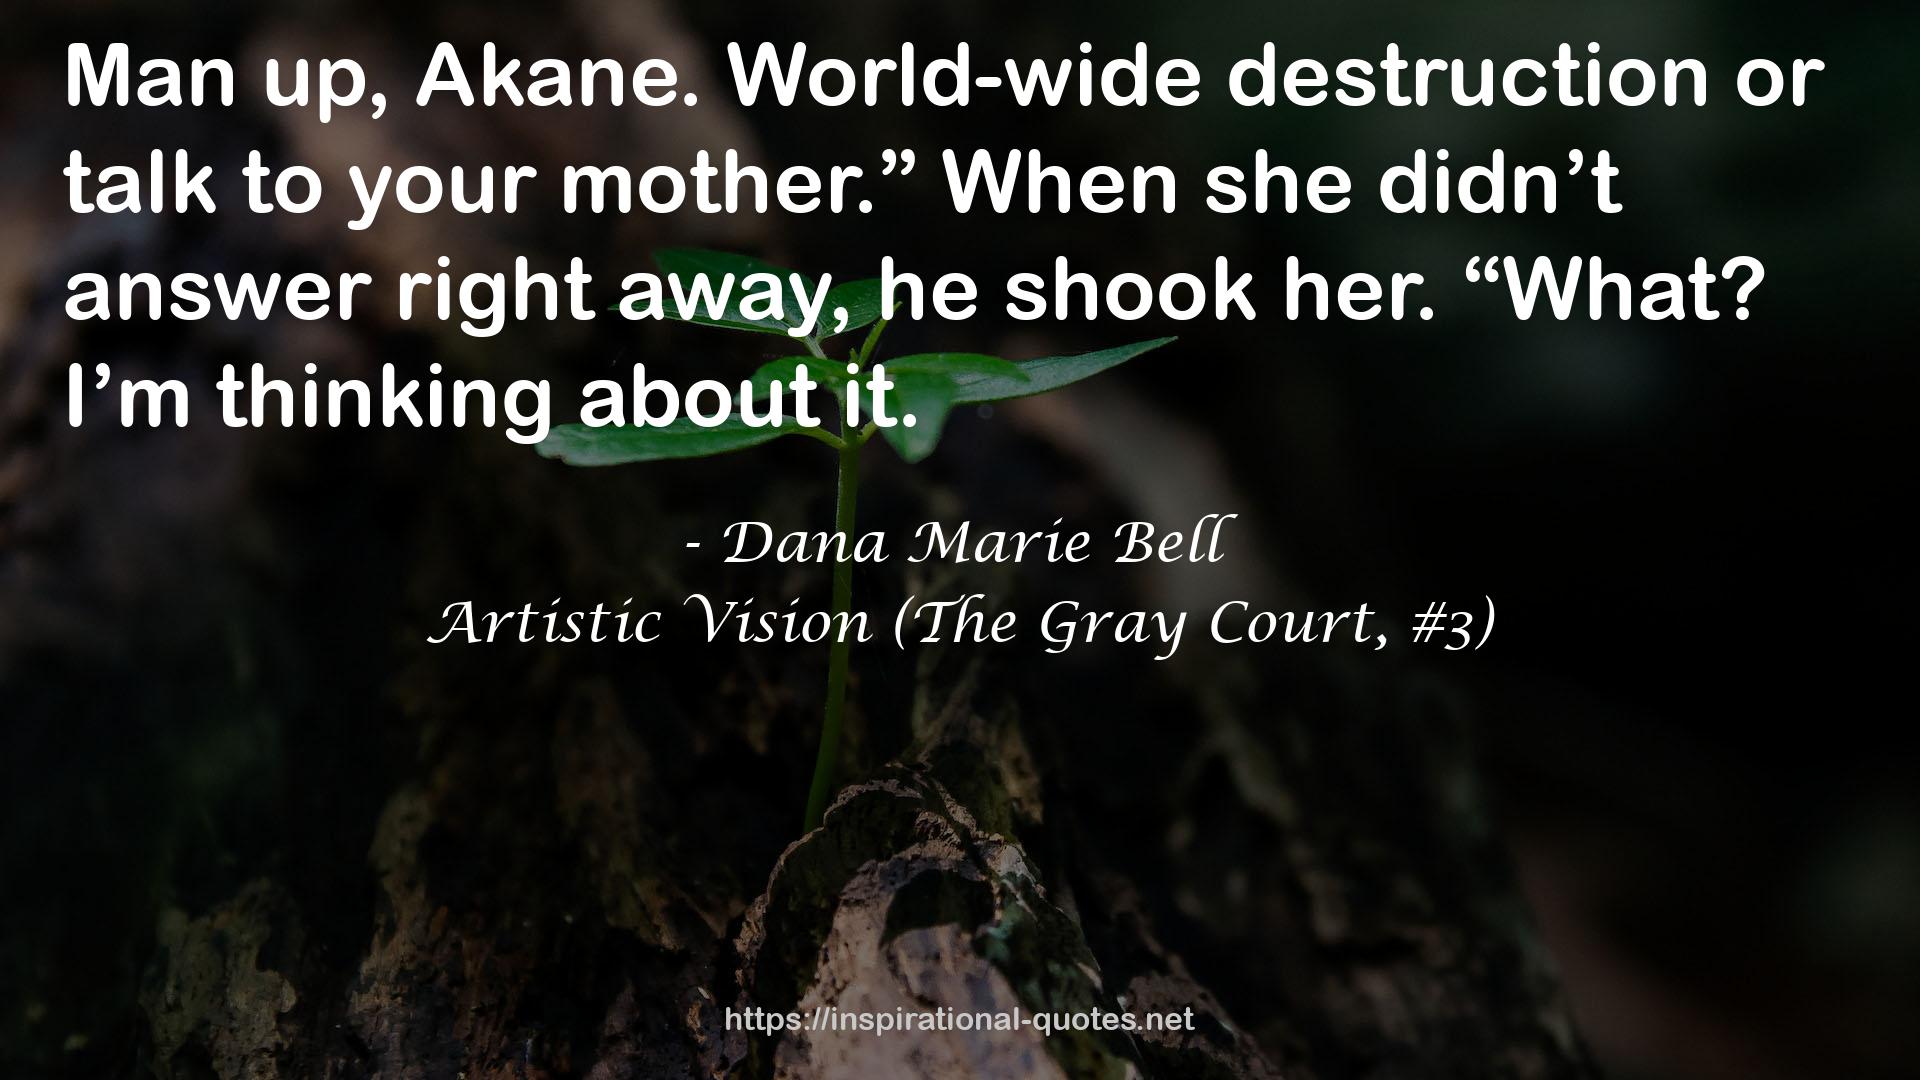 Artistic Vision (The Gray Court, #3) QUOTES